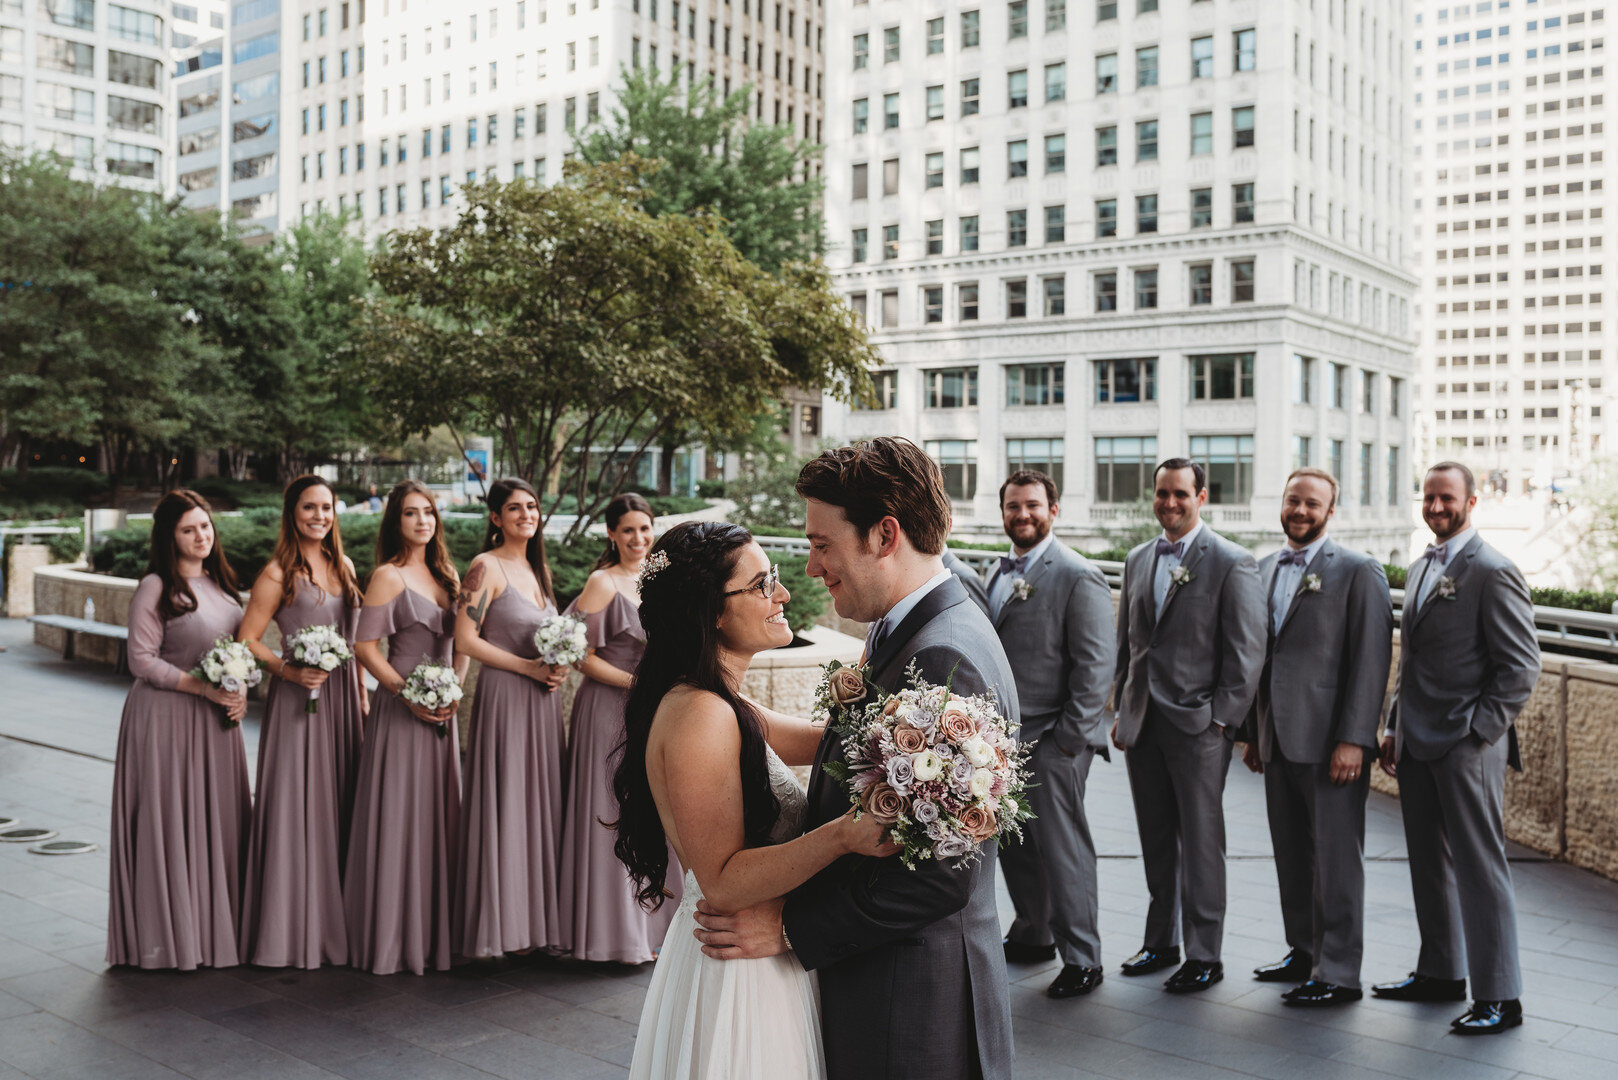 Rustic City Winery Wedding captured by Lisa Kay Creative Photography featured on CHI thee WED!